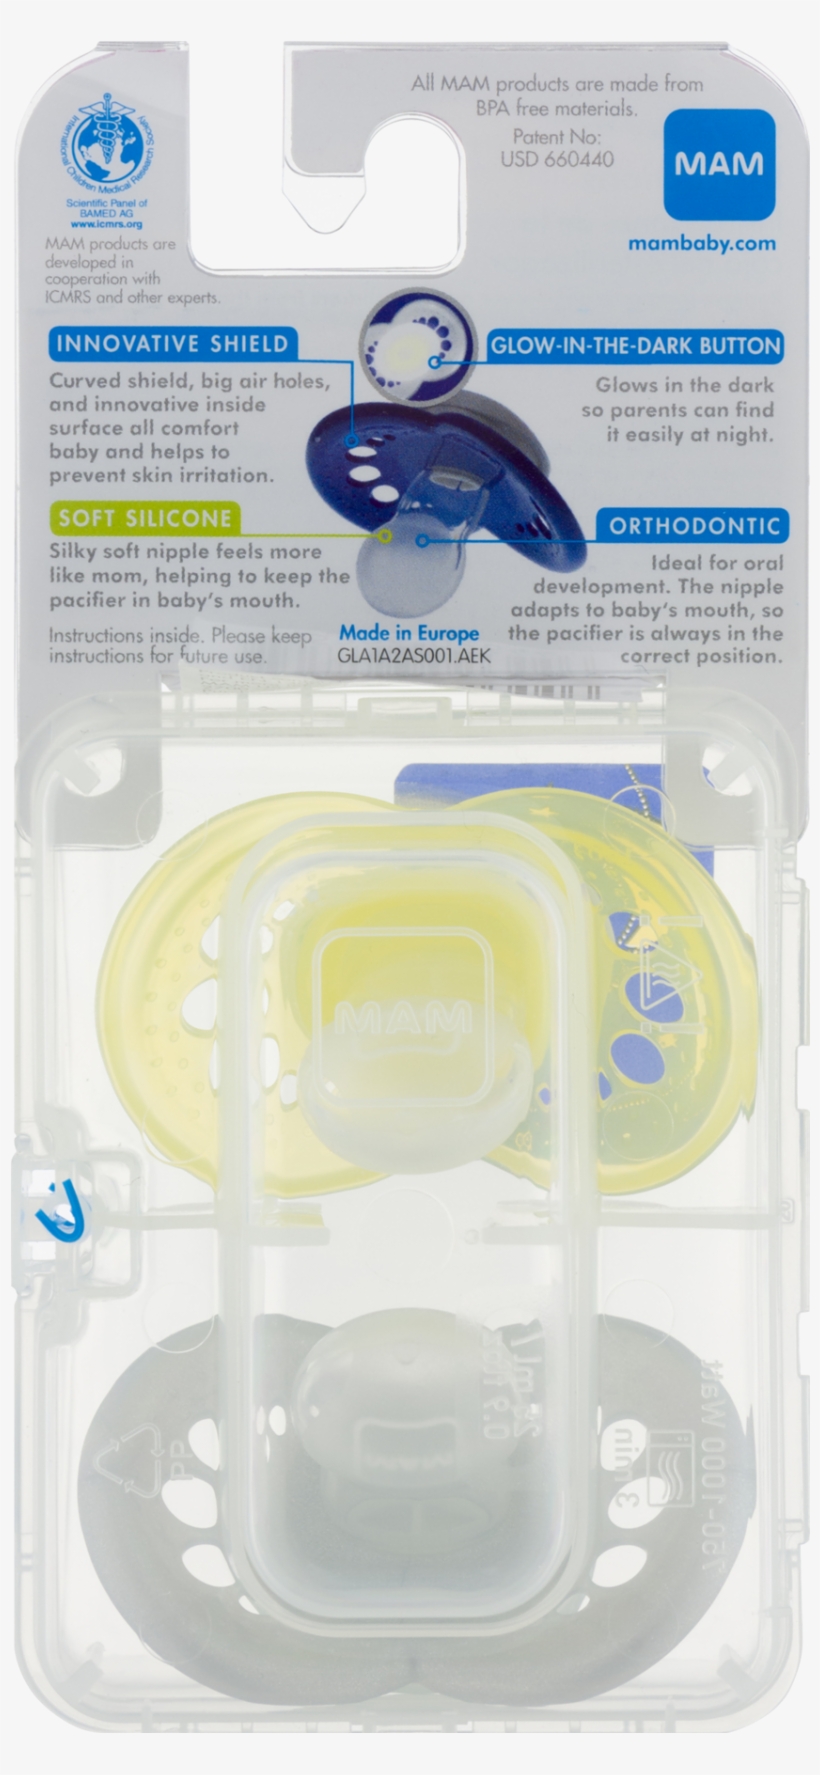 Mam Glow In The Dark Night Orthodontic Pacifier, Colors, transparent png #6900463